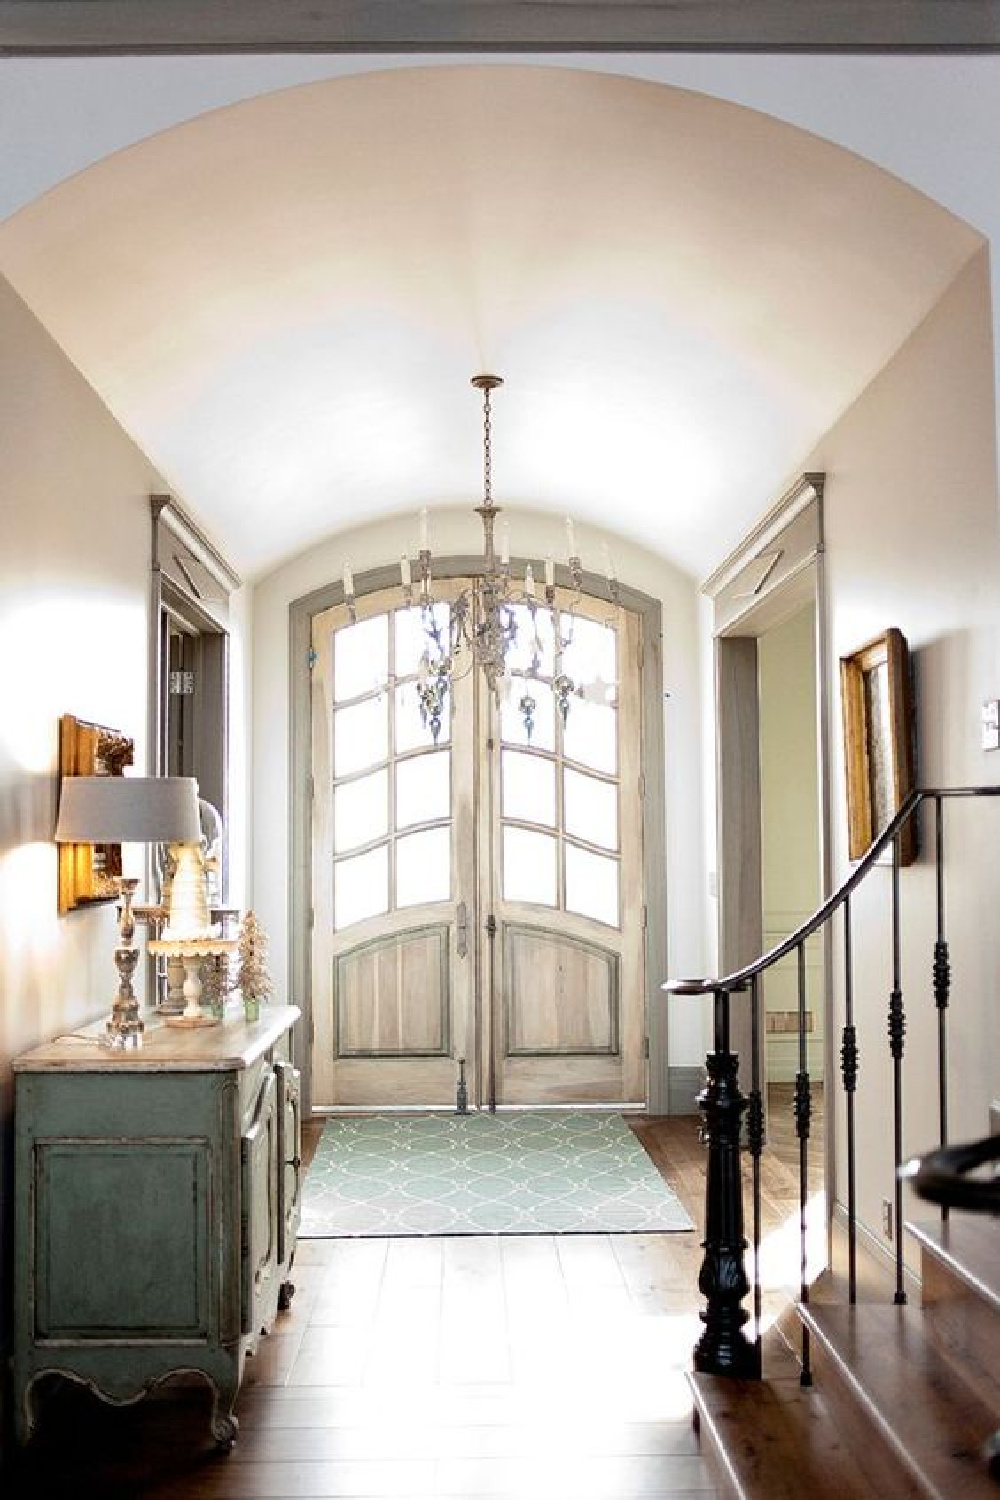 French Country style in a country home inspired by Europe. Heavenly sunshine floods the front entry hall of a French Nordic, French Country style hallway with barreled ceiling and blue grey stained trim.#frenchcountry #interiordesign #decorideas #entry #frontdoor #archeddoors #barrelceiling #staircase